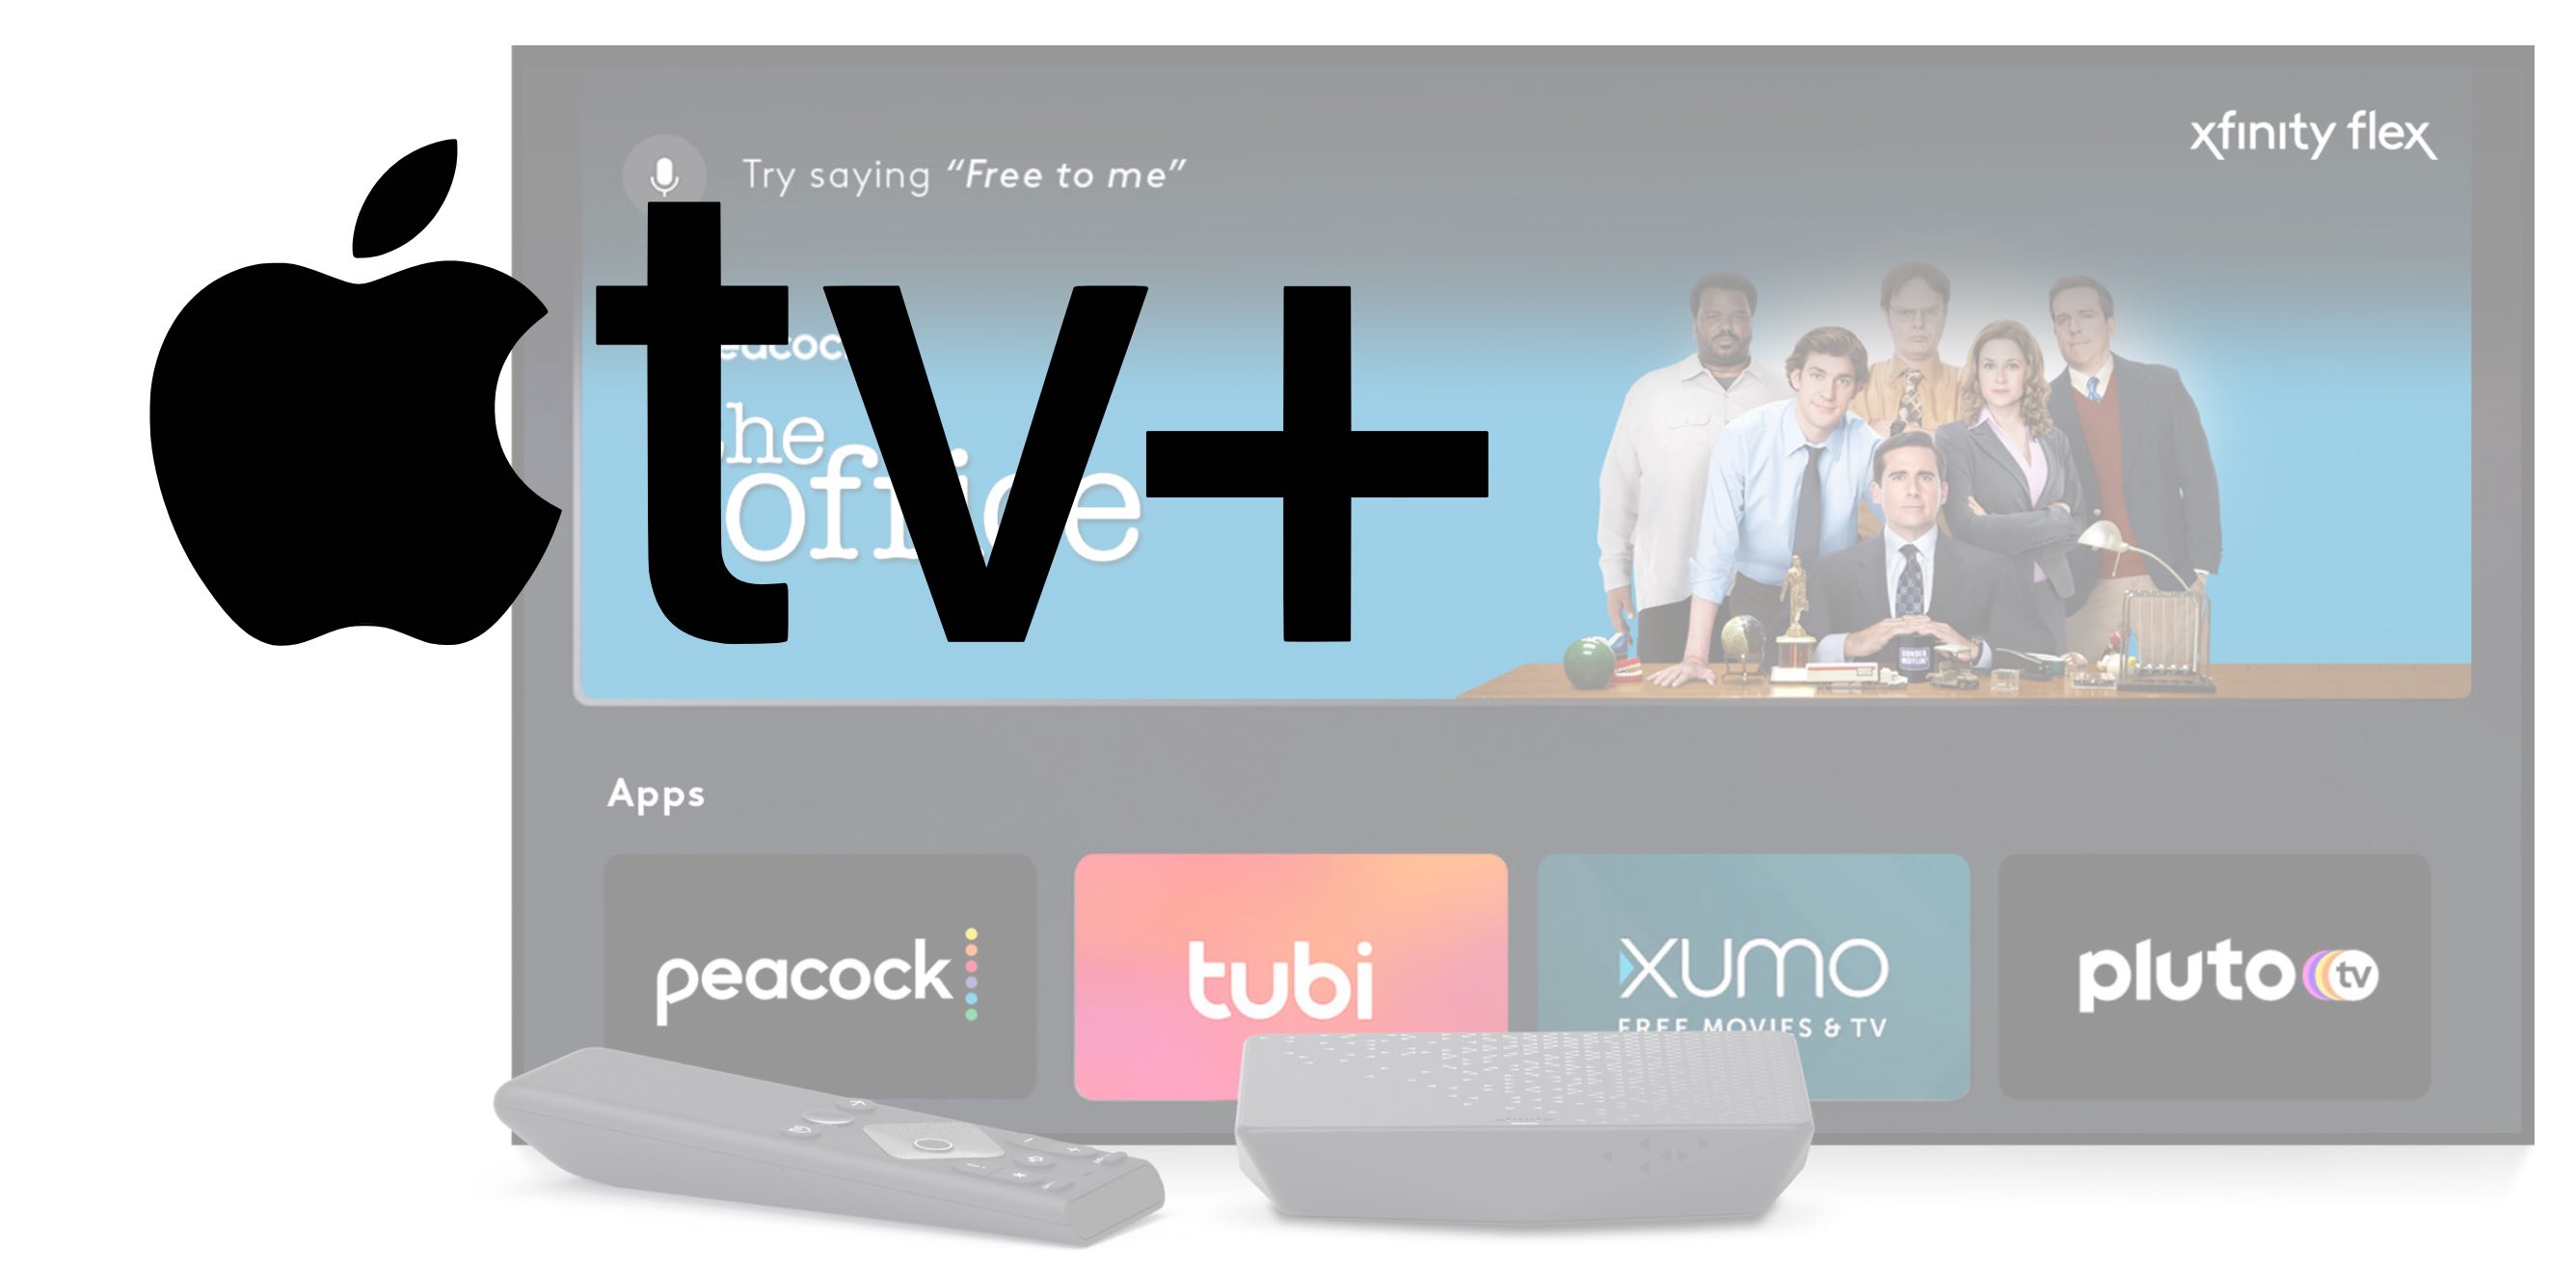 Apple TV app to launch on Xfinity, Sky Q, and other Comcast platforms